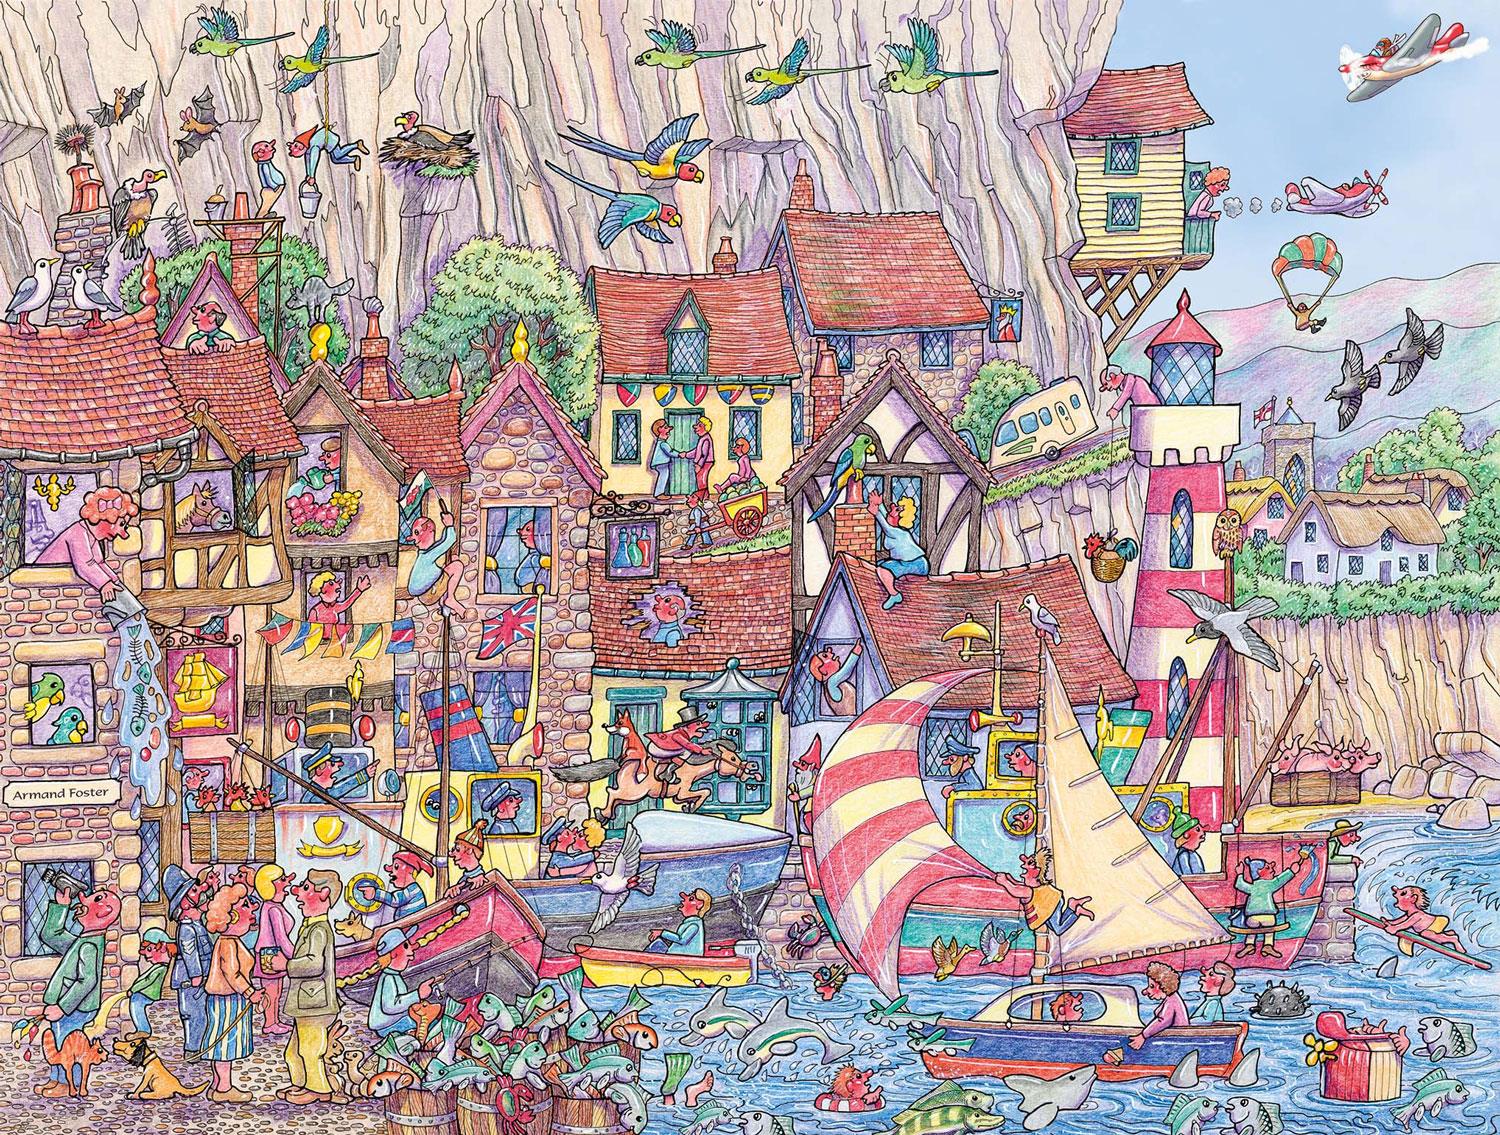 Comical Cove - Armand Foster Jigsaw Puzzle (1000 Pieces)